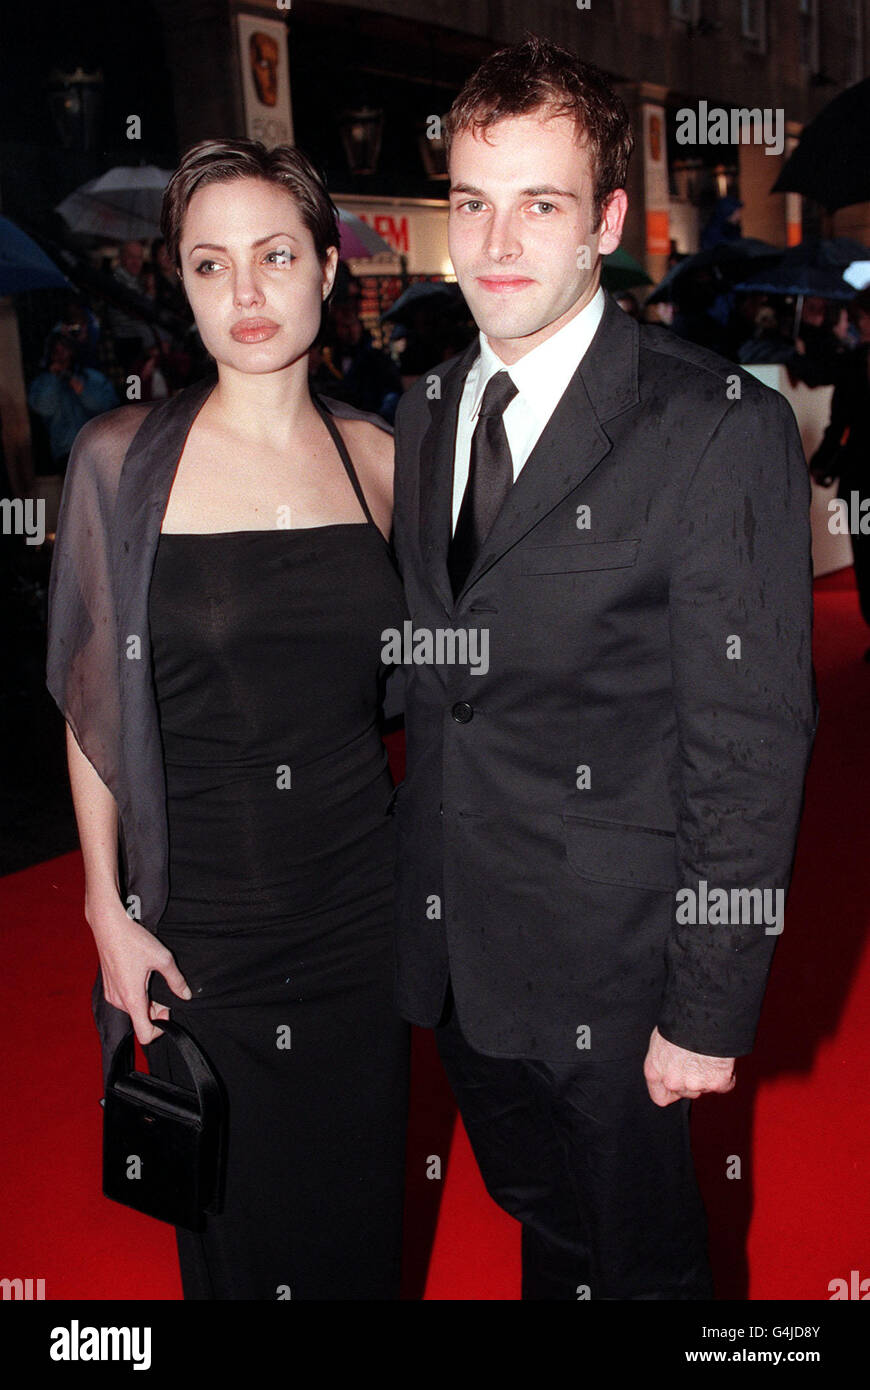 Actor Johnny Lee Miller with his wife actress Angelina Jolie at the BAFTA Awards at the Grosvenor House Hotel. Stock Photo